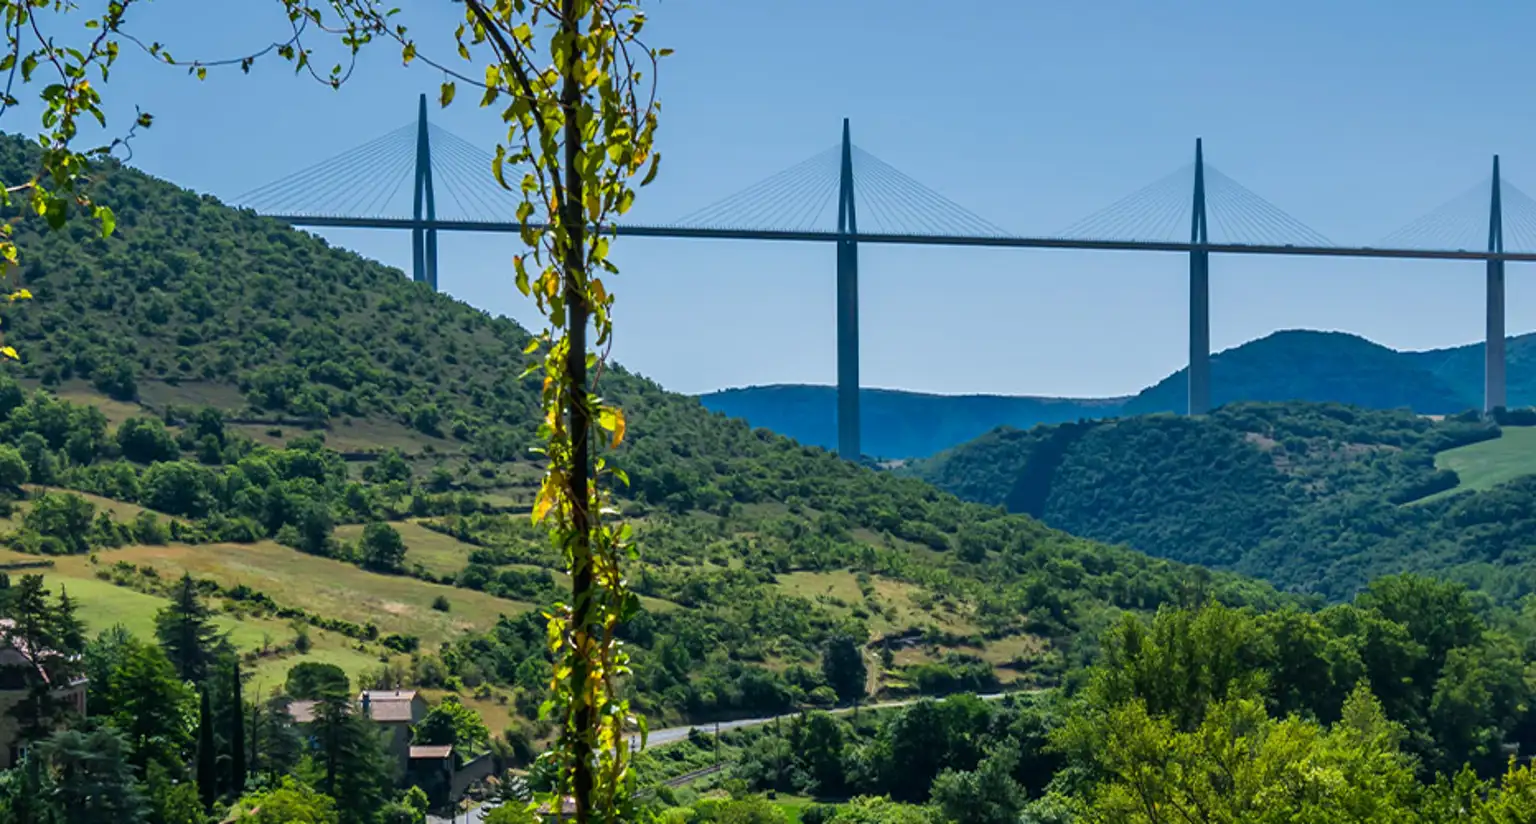 Exploring Millau and its viaduct